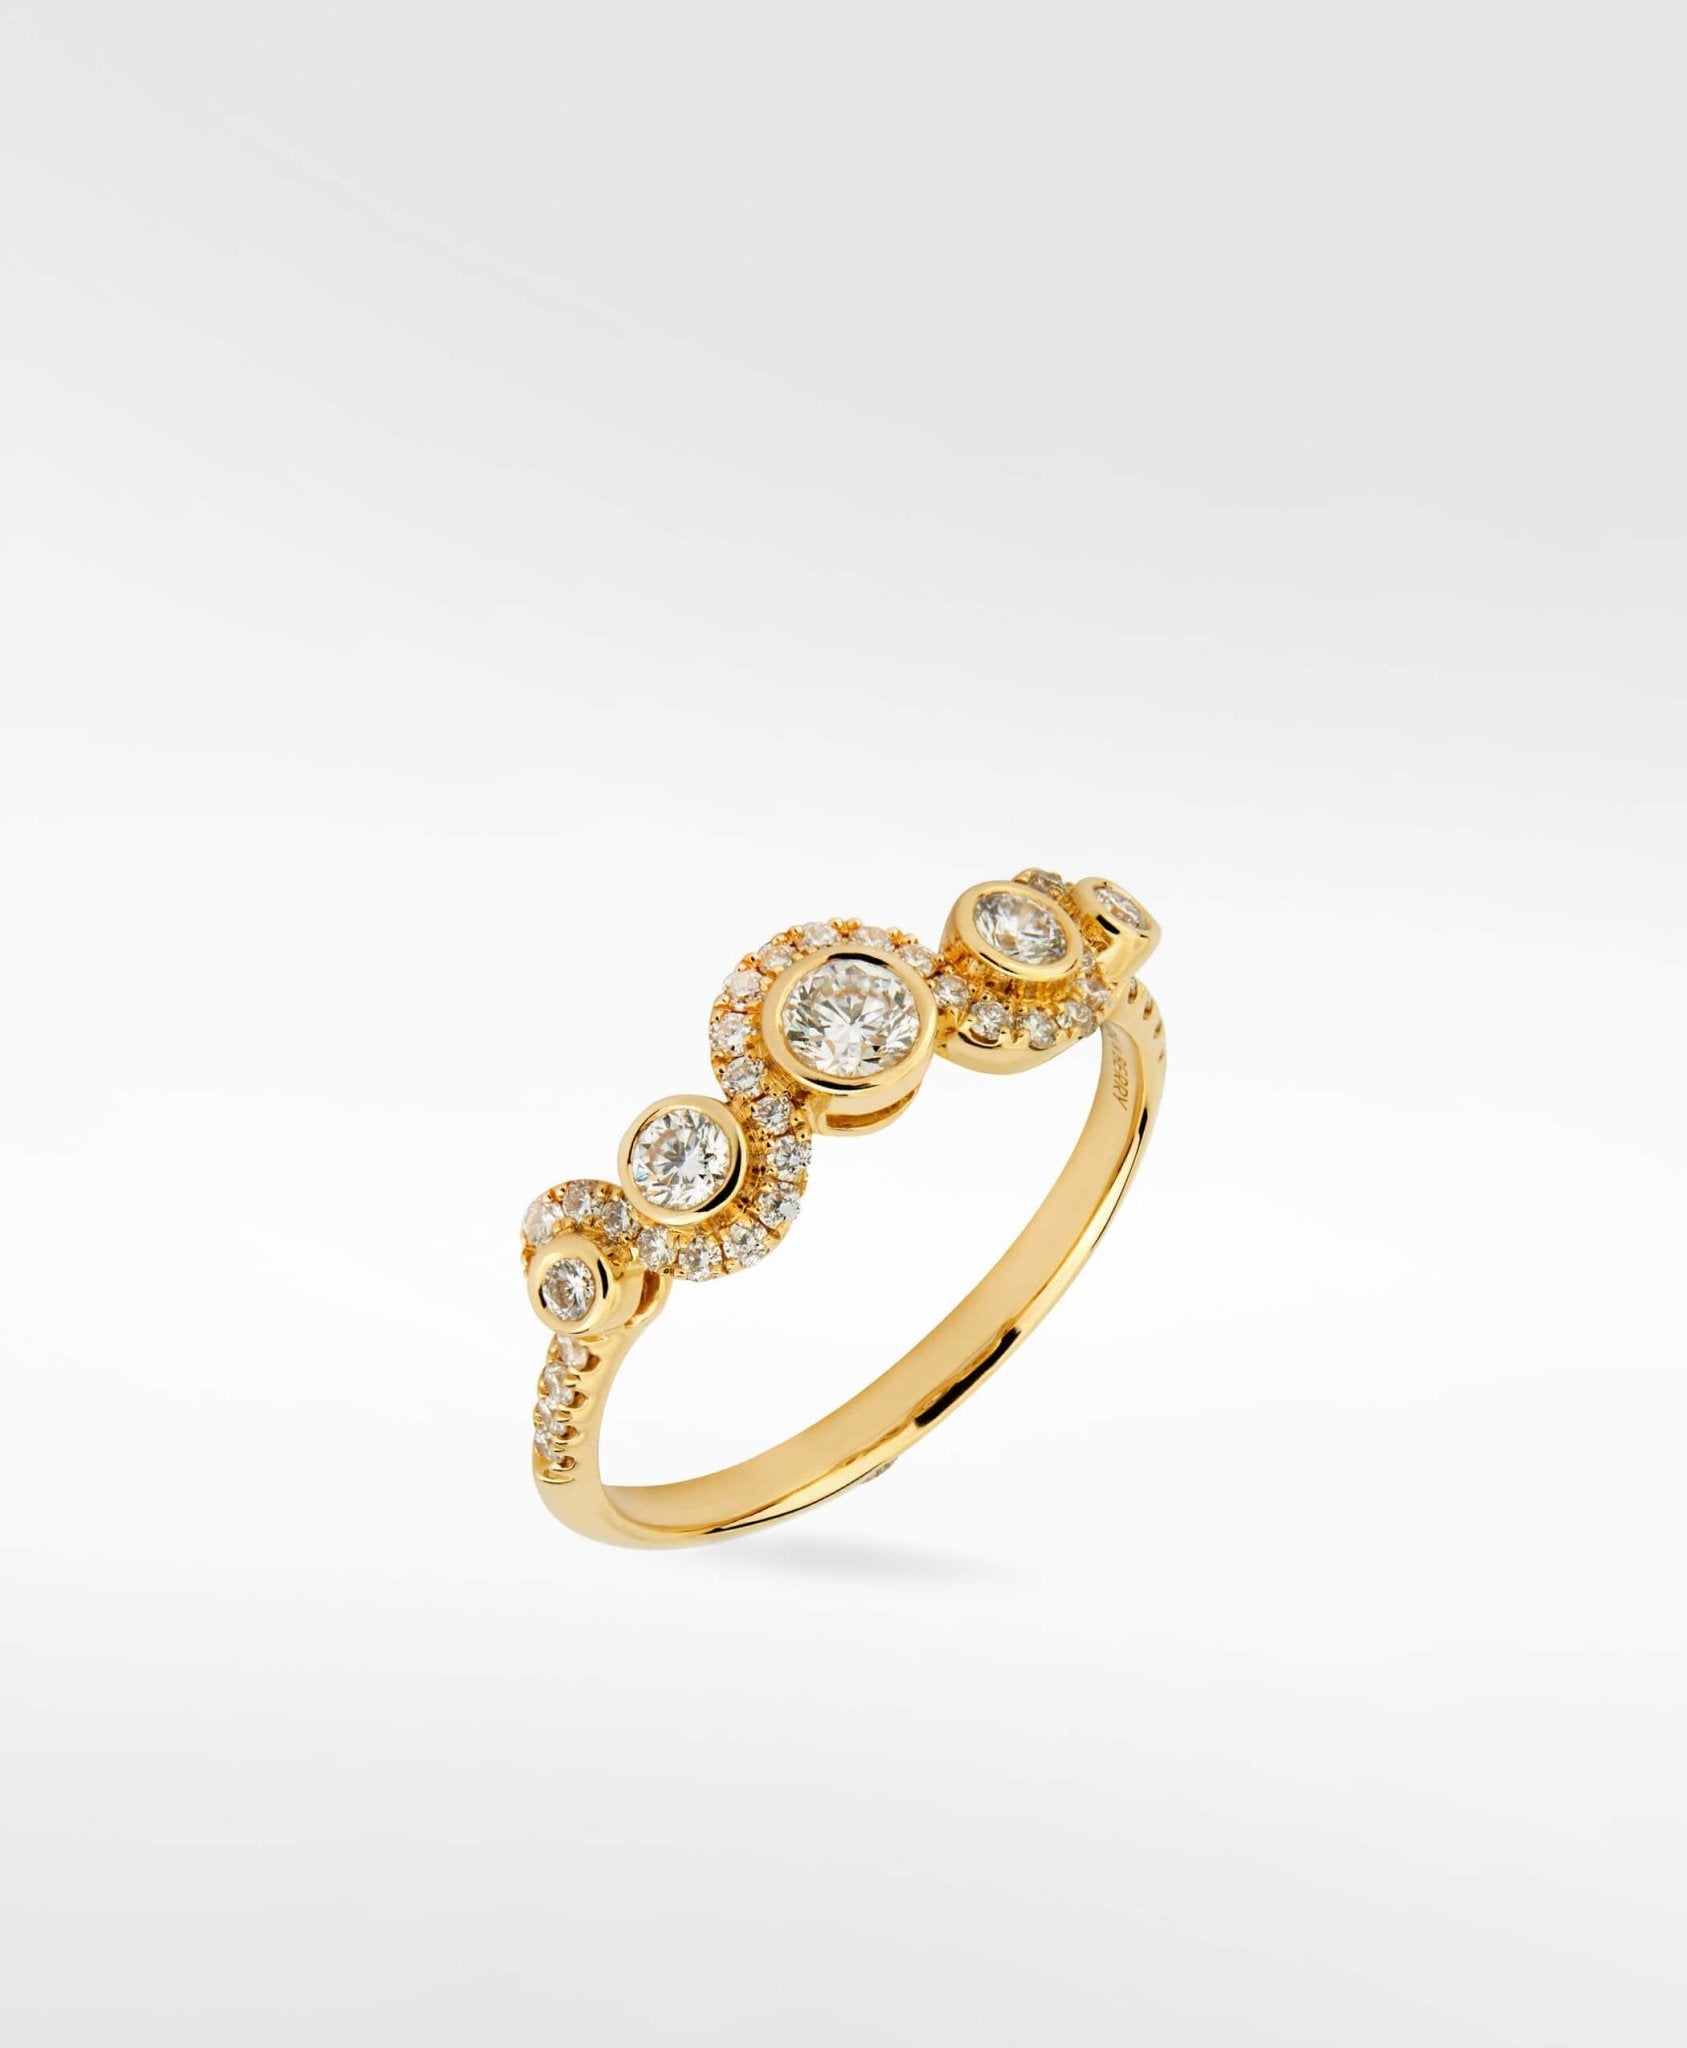 Wave Diamond Ring in 18K Gold - Lark and Berry